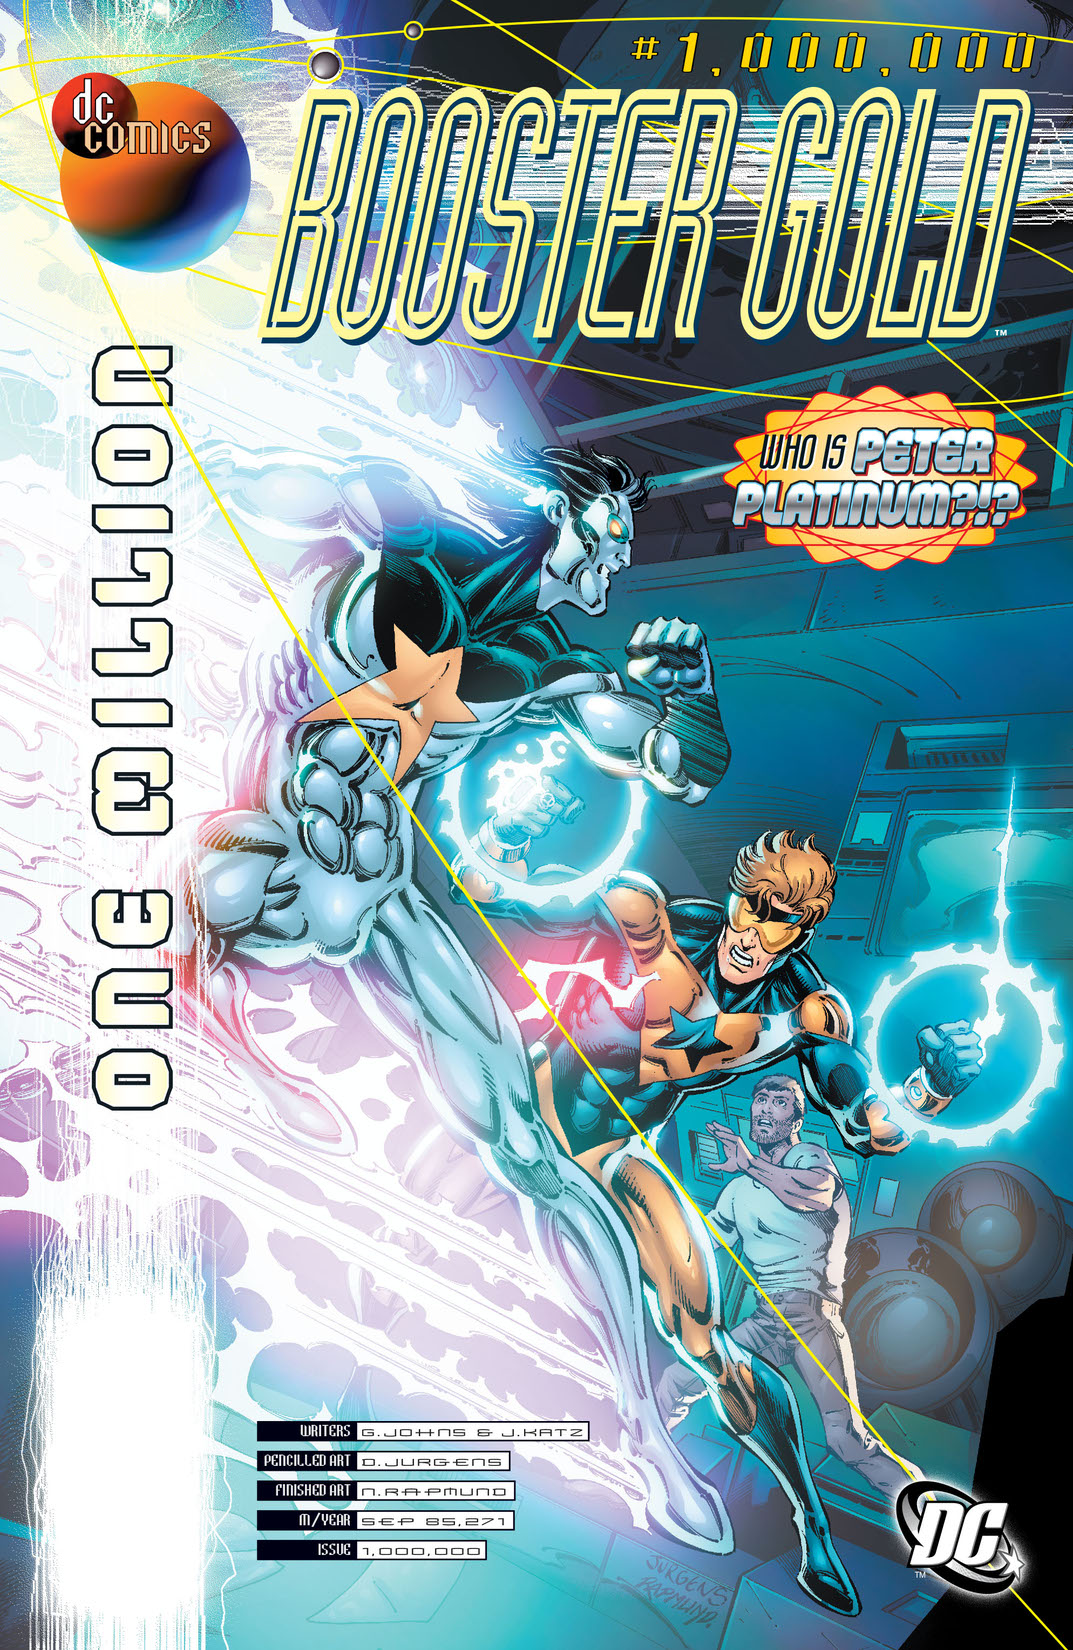 Booster Gold (2007-) #1000000 preview images